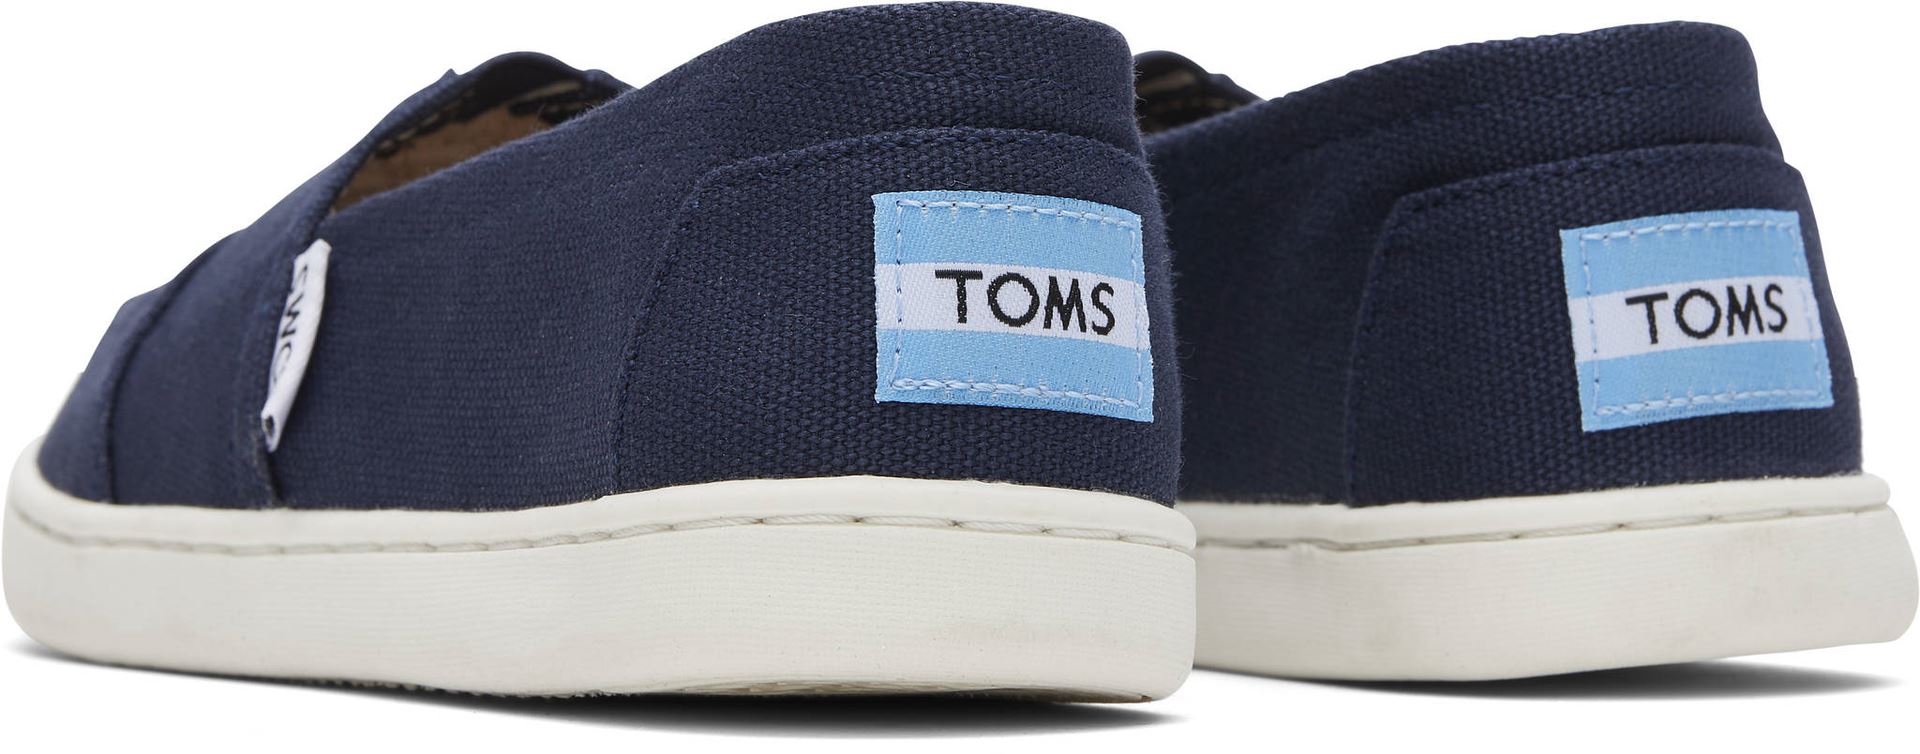 A unisex canvas shoe by TOMS, style Alpargata, a slip on in navy. Back view of a pair.